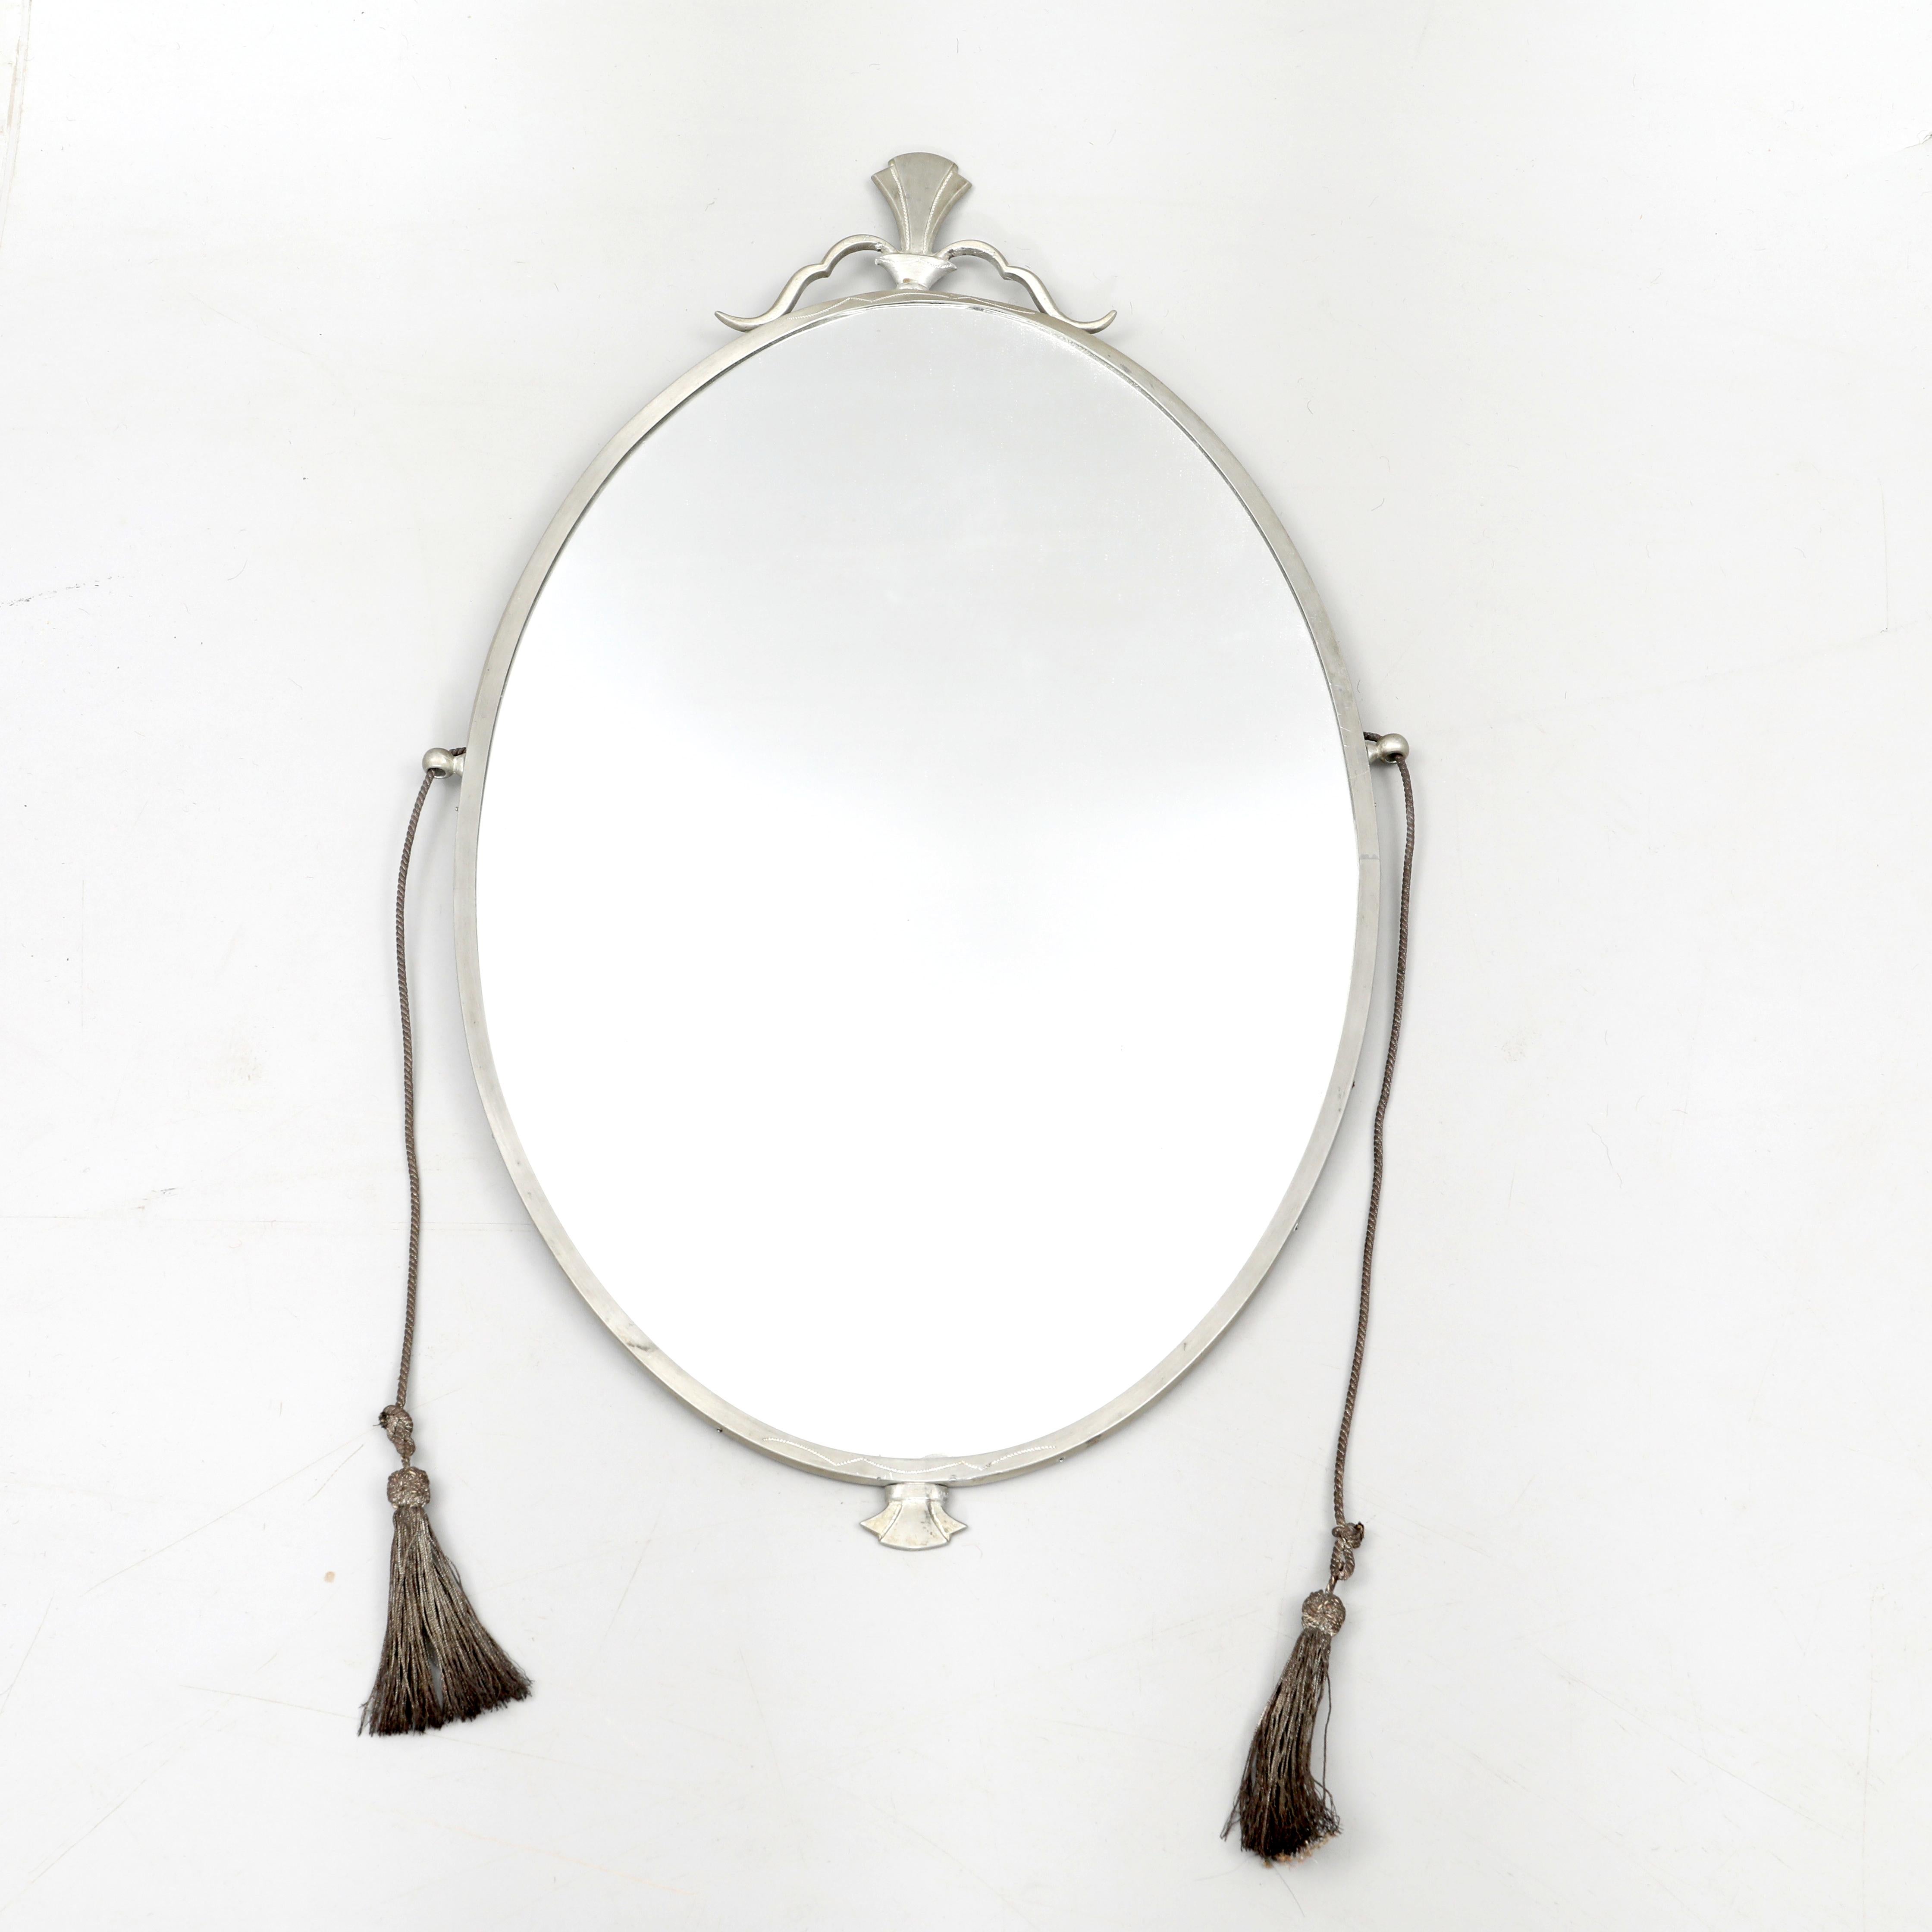 Nils Fougstedt - Scandinavian morden.

A beautiful oval mirror i pewter by Nils Fougstedt, Svenskt Tenn, Sweden 1930s. 

The mirror has a fine decoration and detailing and metal tassels. It is a very early mirror, hence there are signs of use